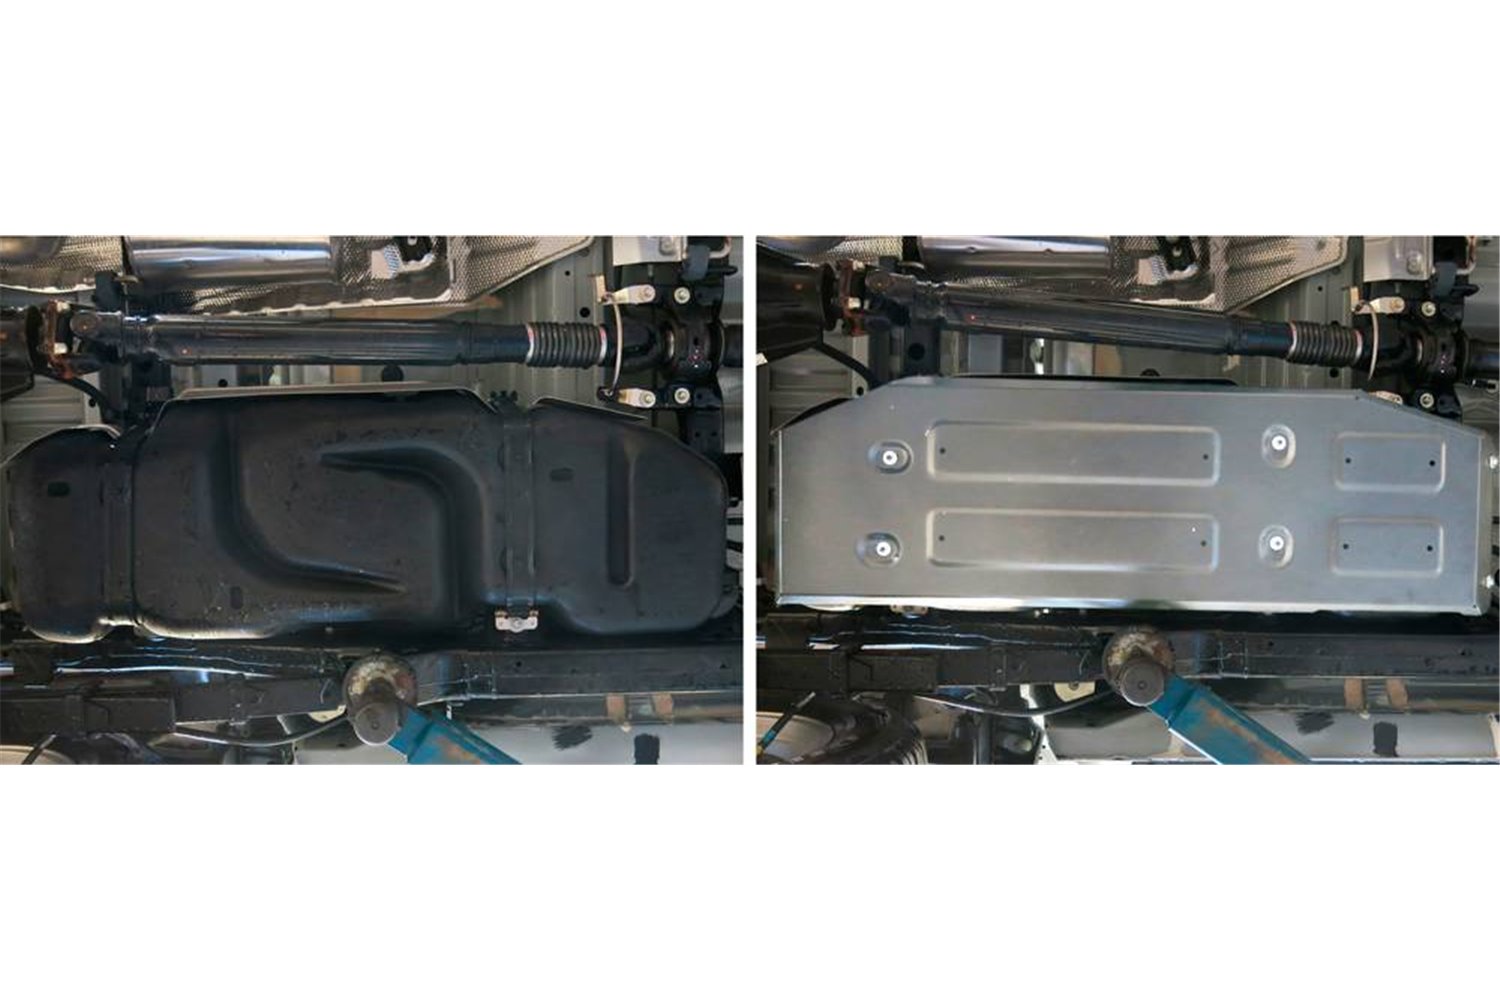 Skid Plate for fuel tank › 2015-2019 & 2018-2020 & 2020+ Toyota...